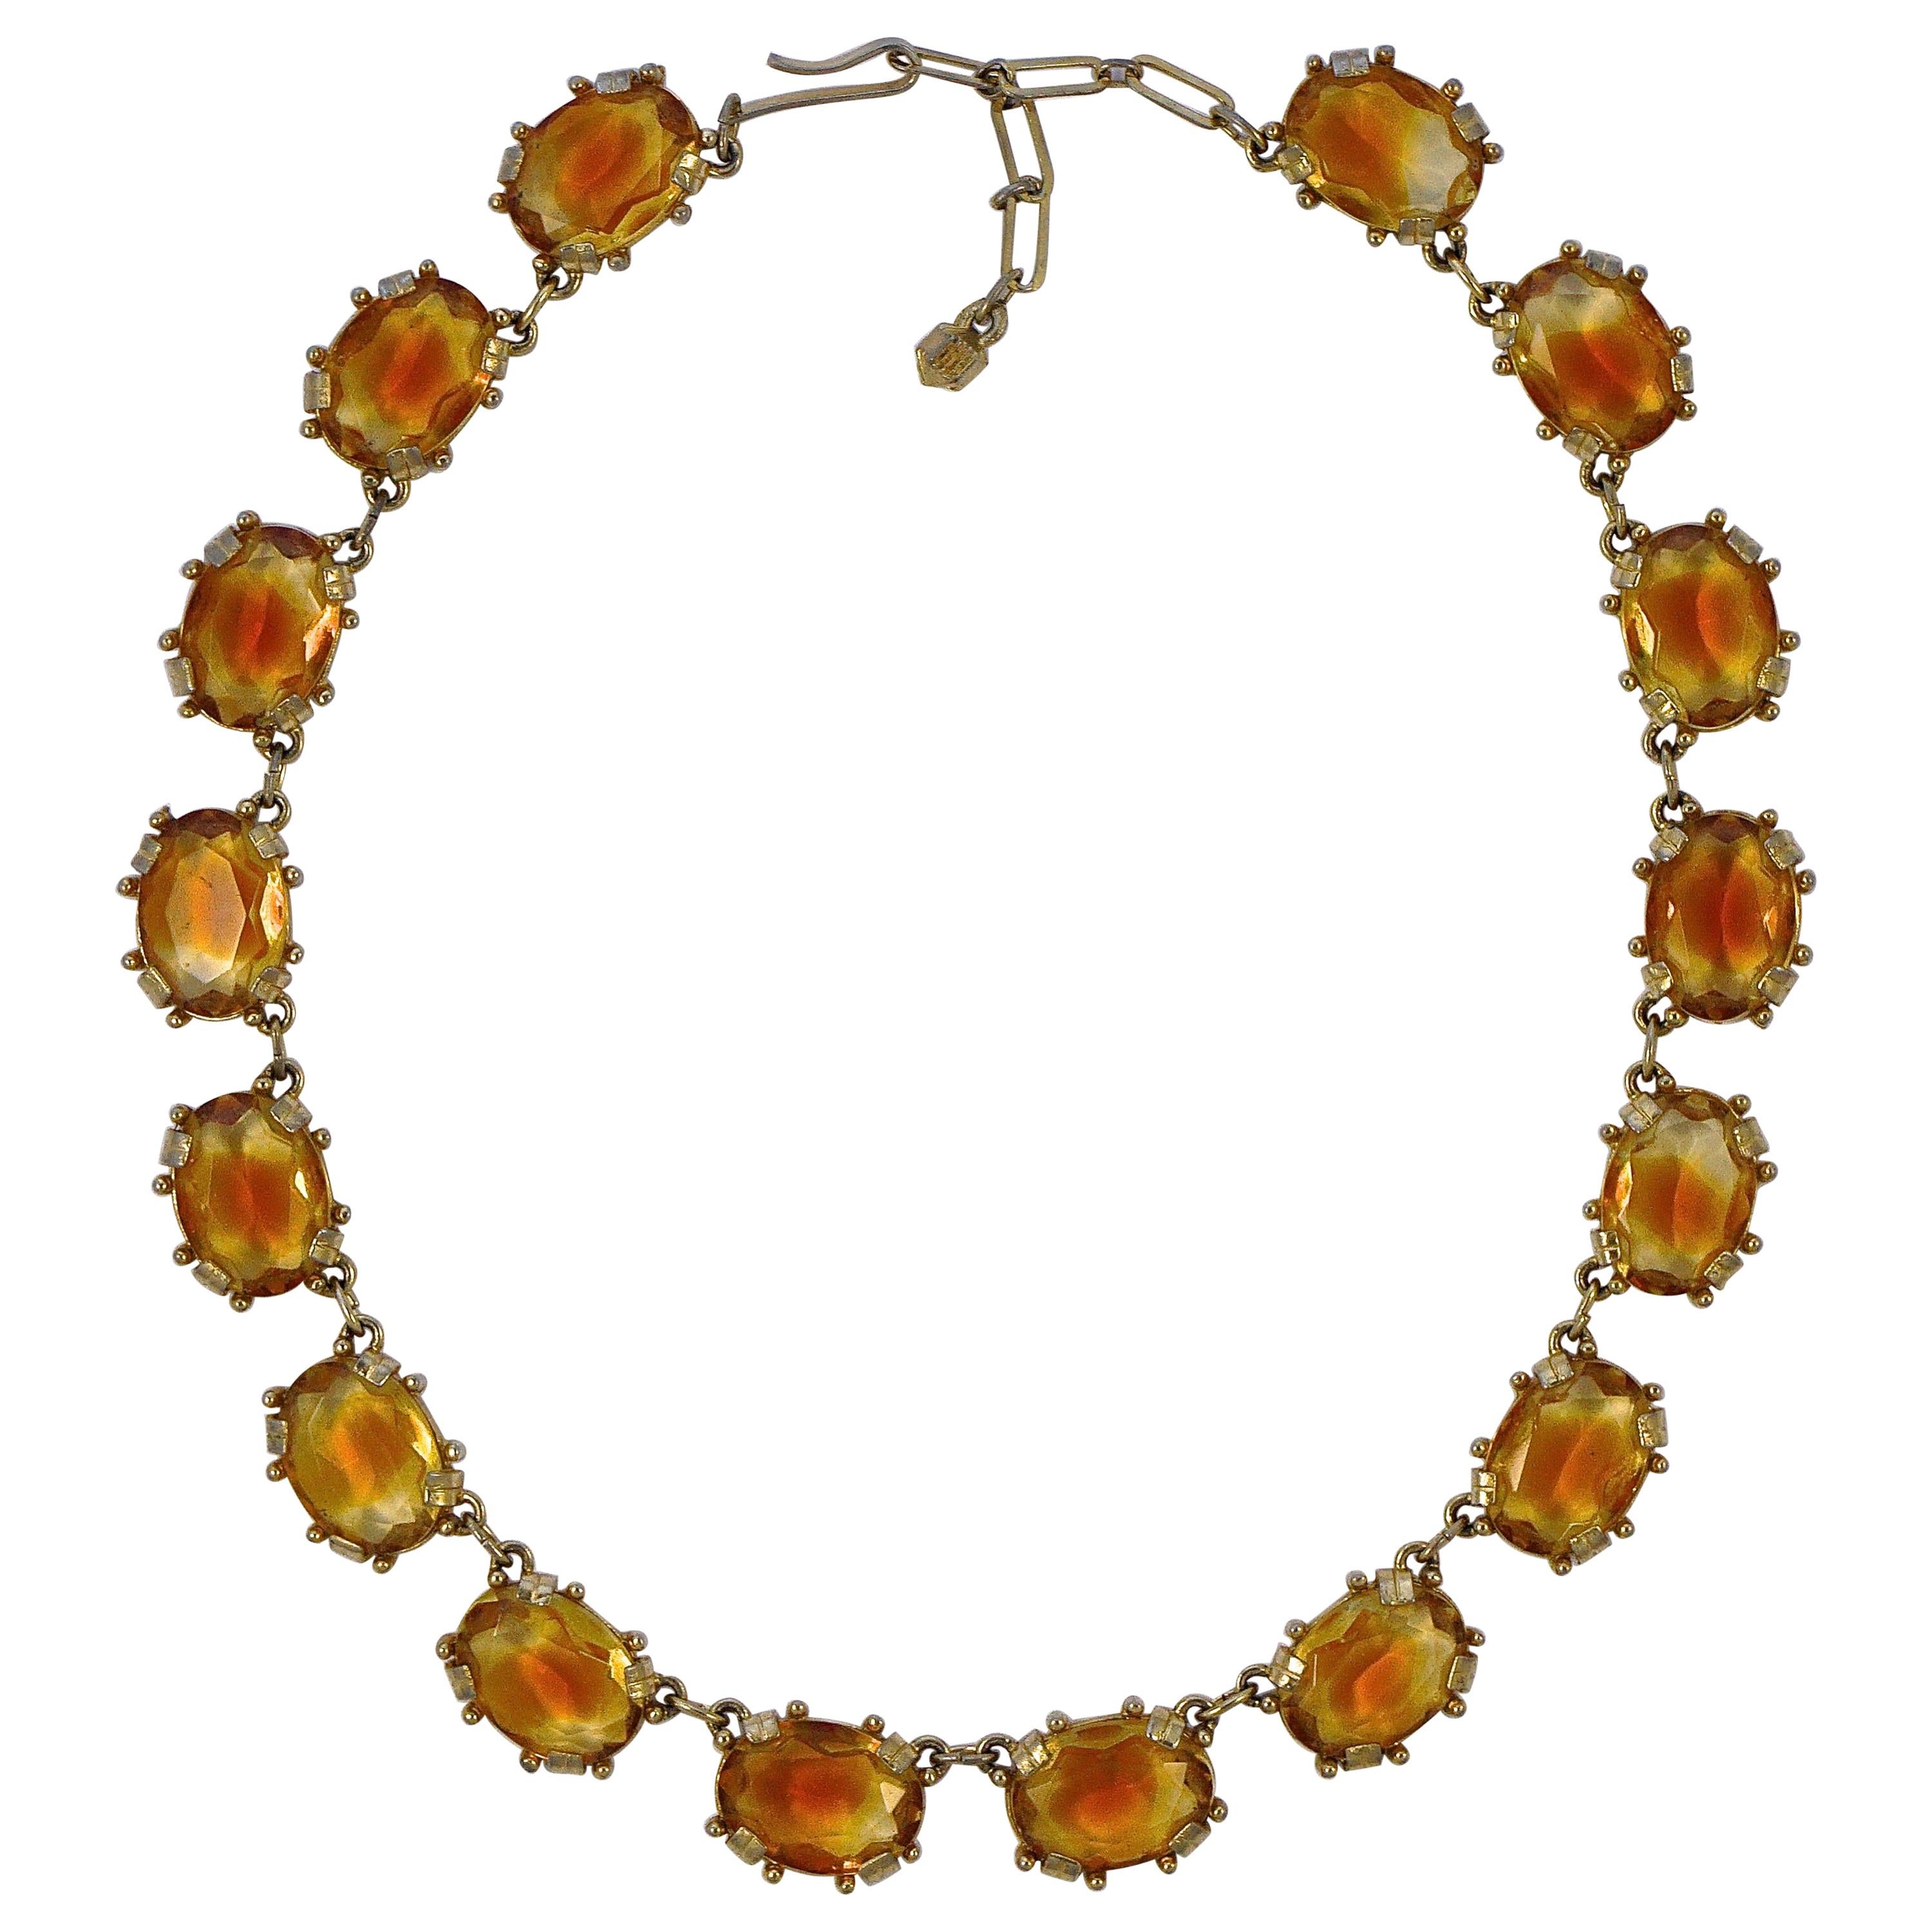 Gold Plated Faceted Oval Amber and Clear Glass Riviere Necklace circa 1950s